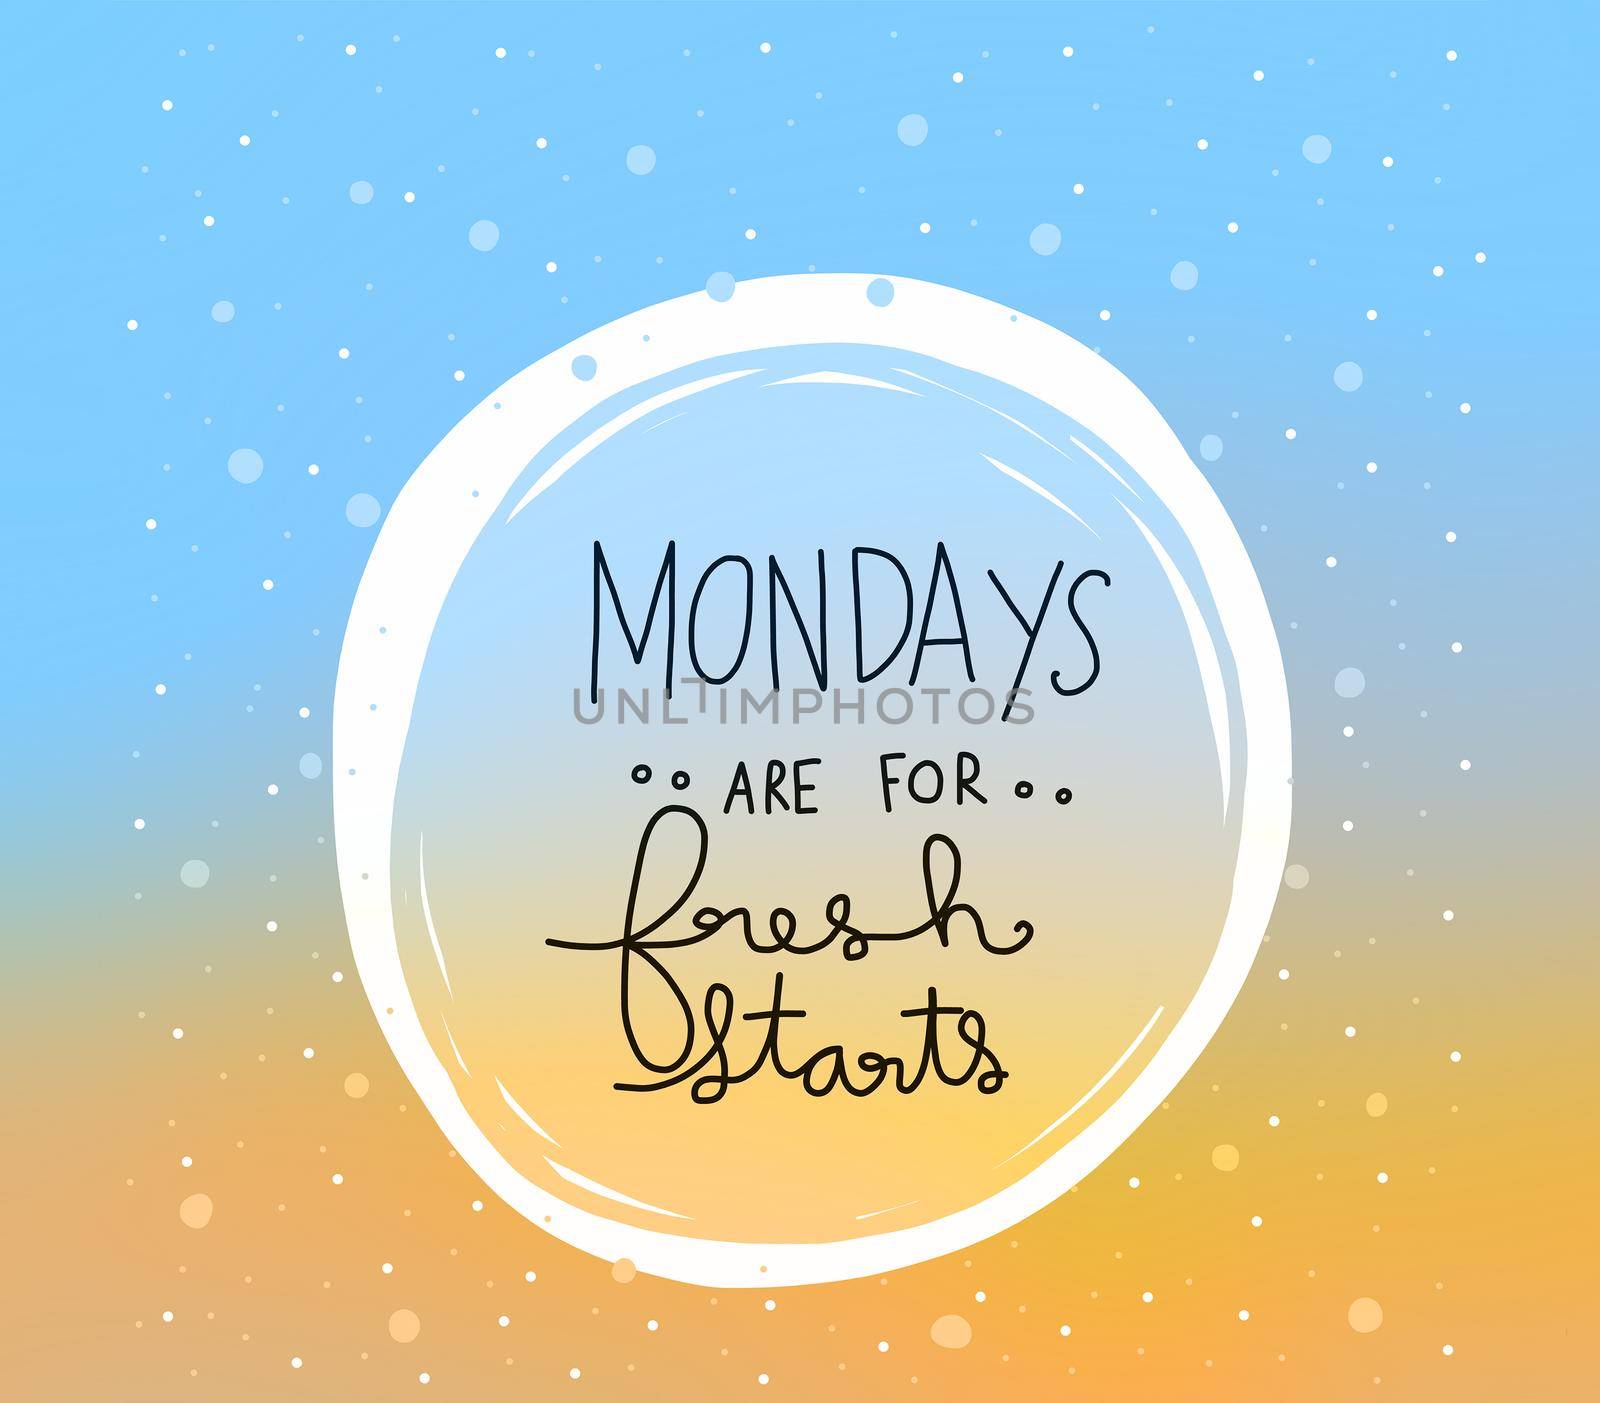 Mondays are for fresh starts word lettering blue and yellow gradient background illustration by Yoopho